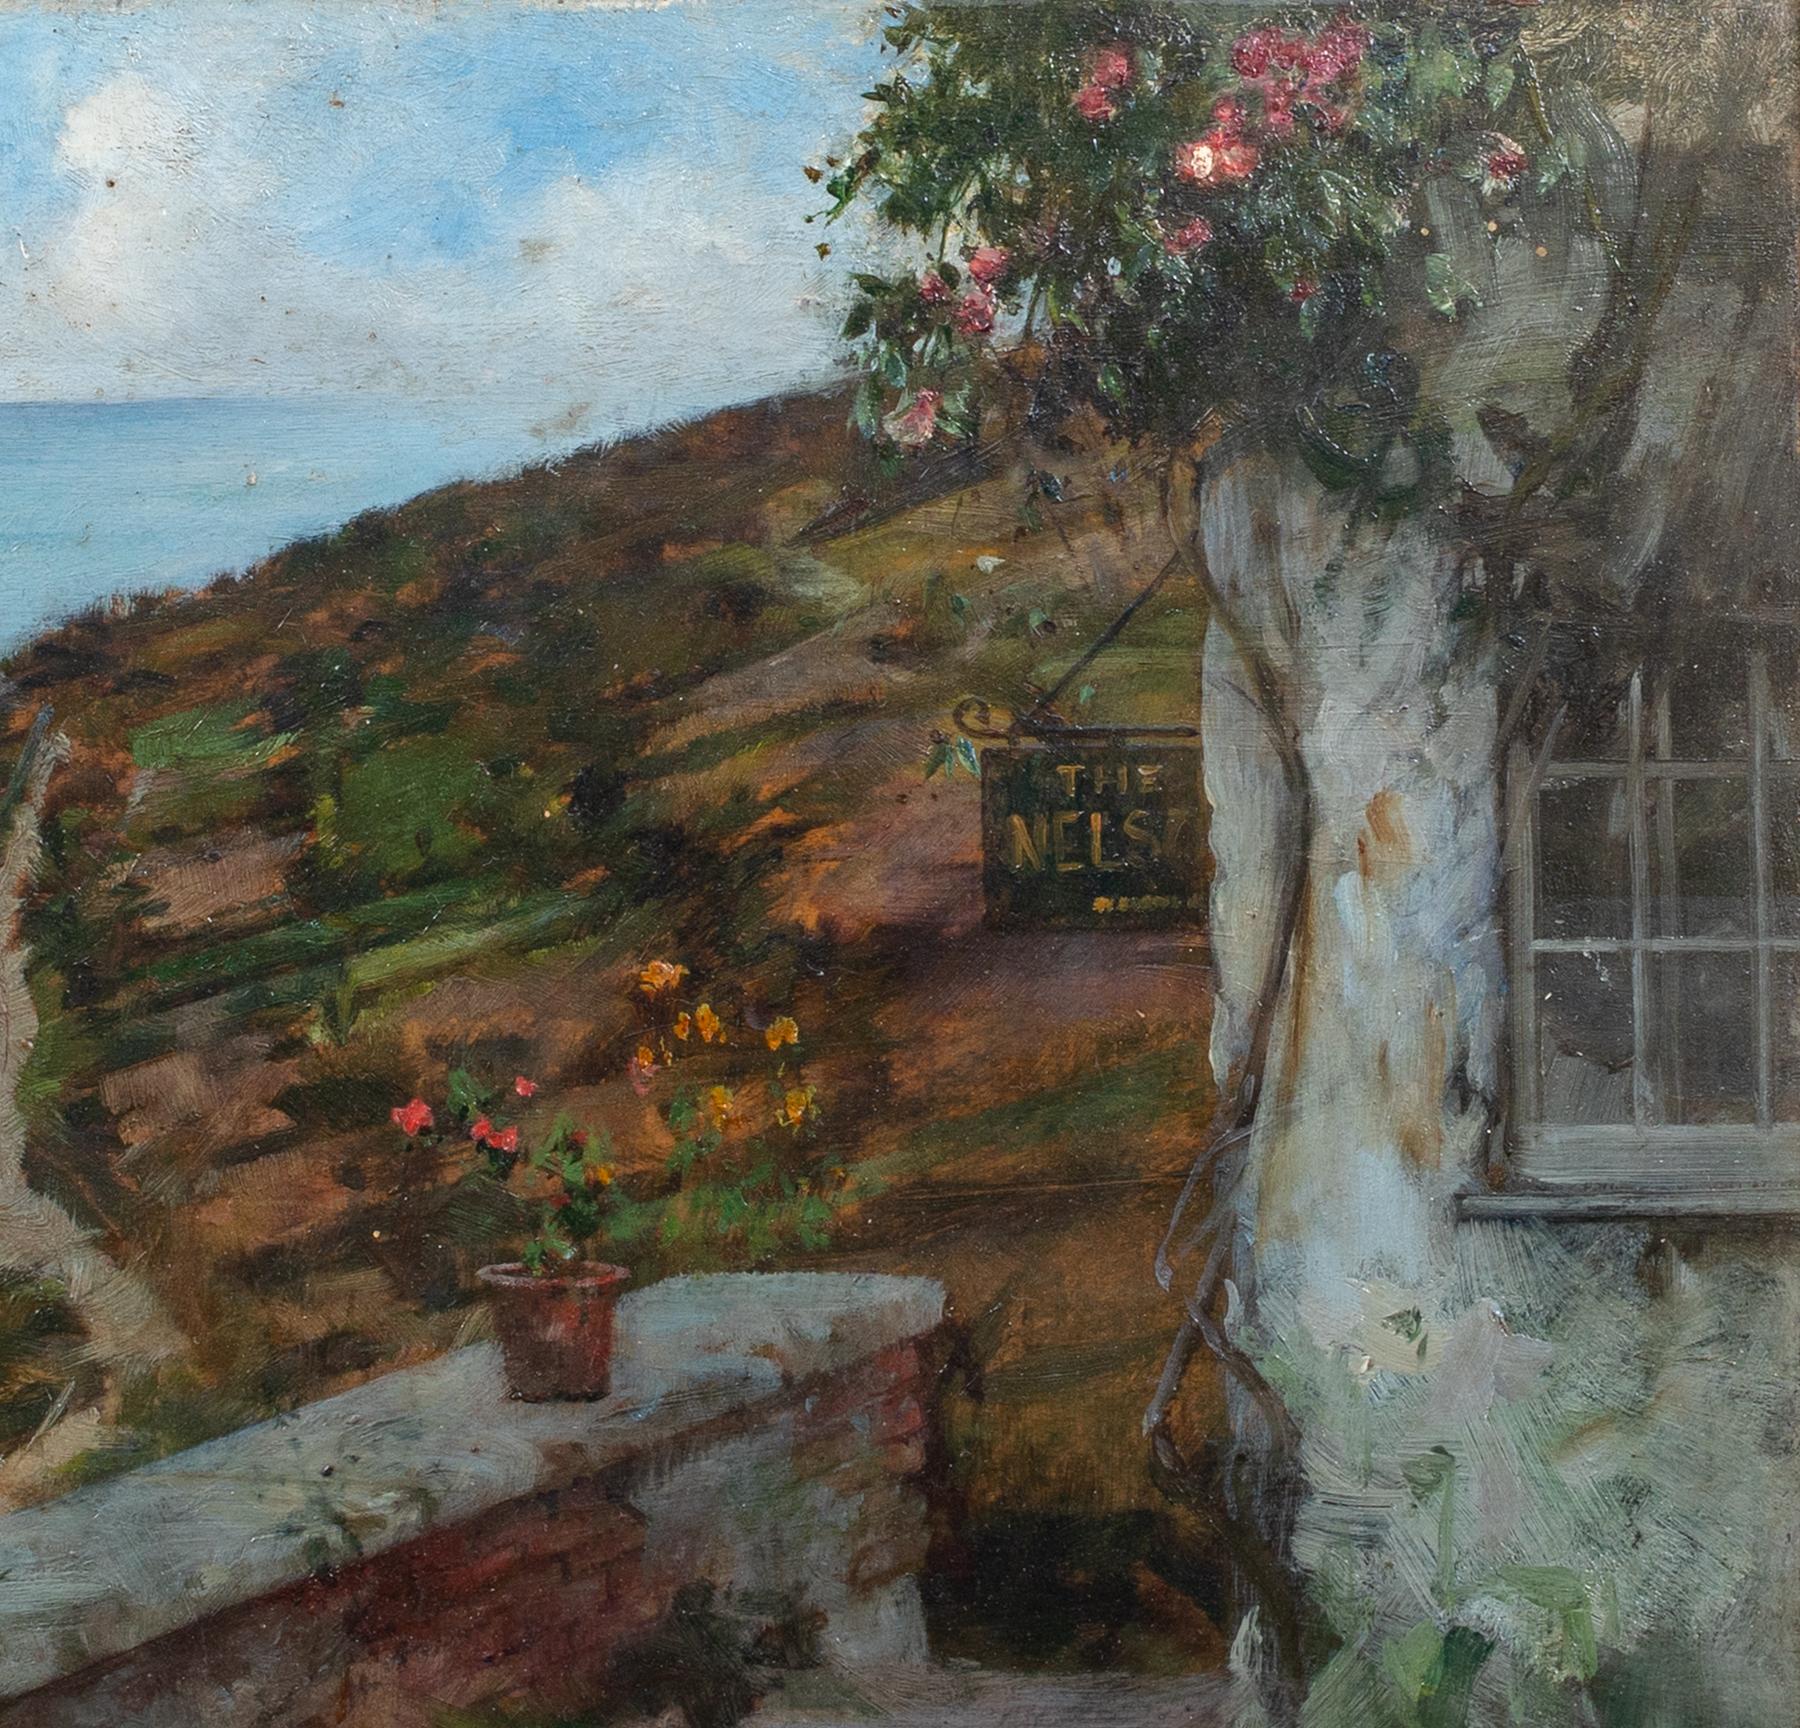 View Of The Coast, Cornwall, dated 1899

by  ALBERT CHEVALLIER TAYLER (1862-1925) saleds to $1,100,000

19th Century view of the coast from a hilltop cottage, Cornwall, oil on panel by Albert Chevalier Tayler. Excellent quality and condition example